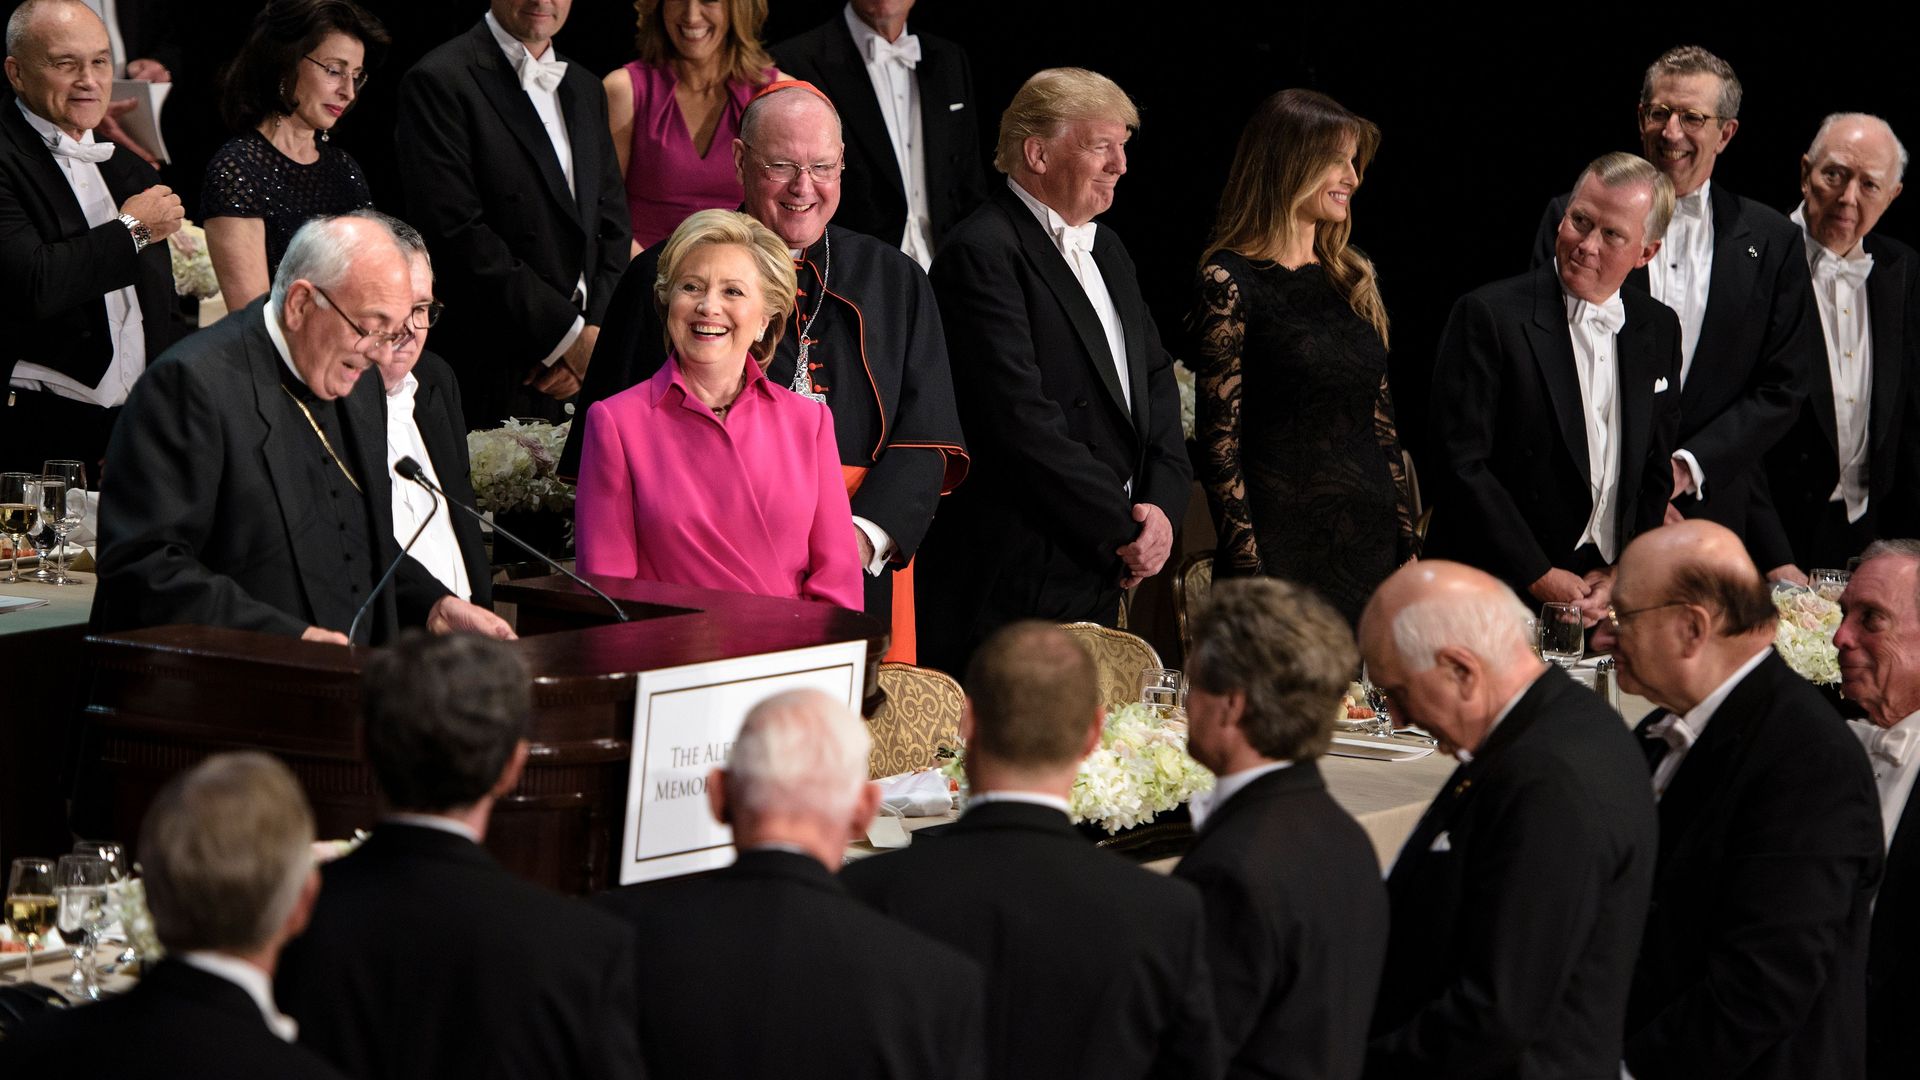 Attendees at the 2016 Alfred E. Smith Memorial Foundation dinner are mostly white men in tuxedos. Hillary Clinton and Donald Trump attended. 